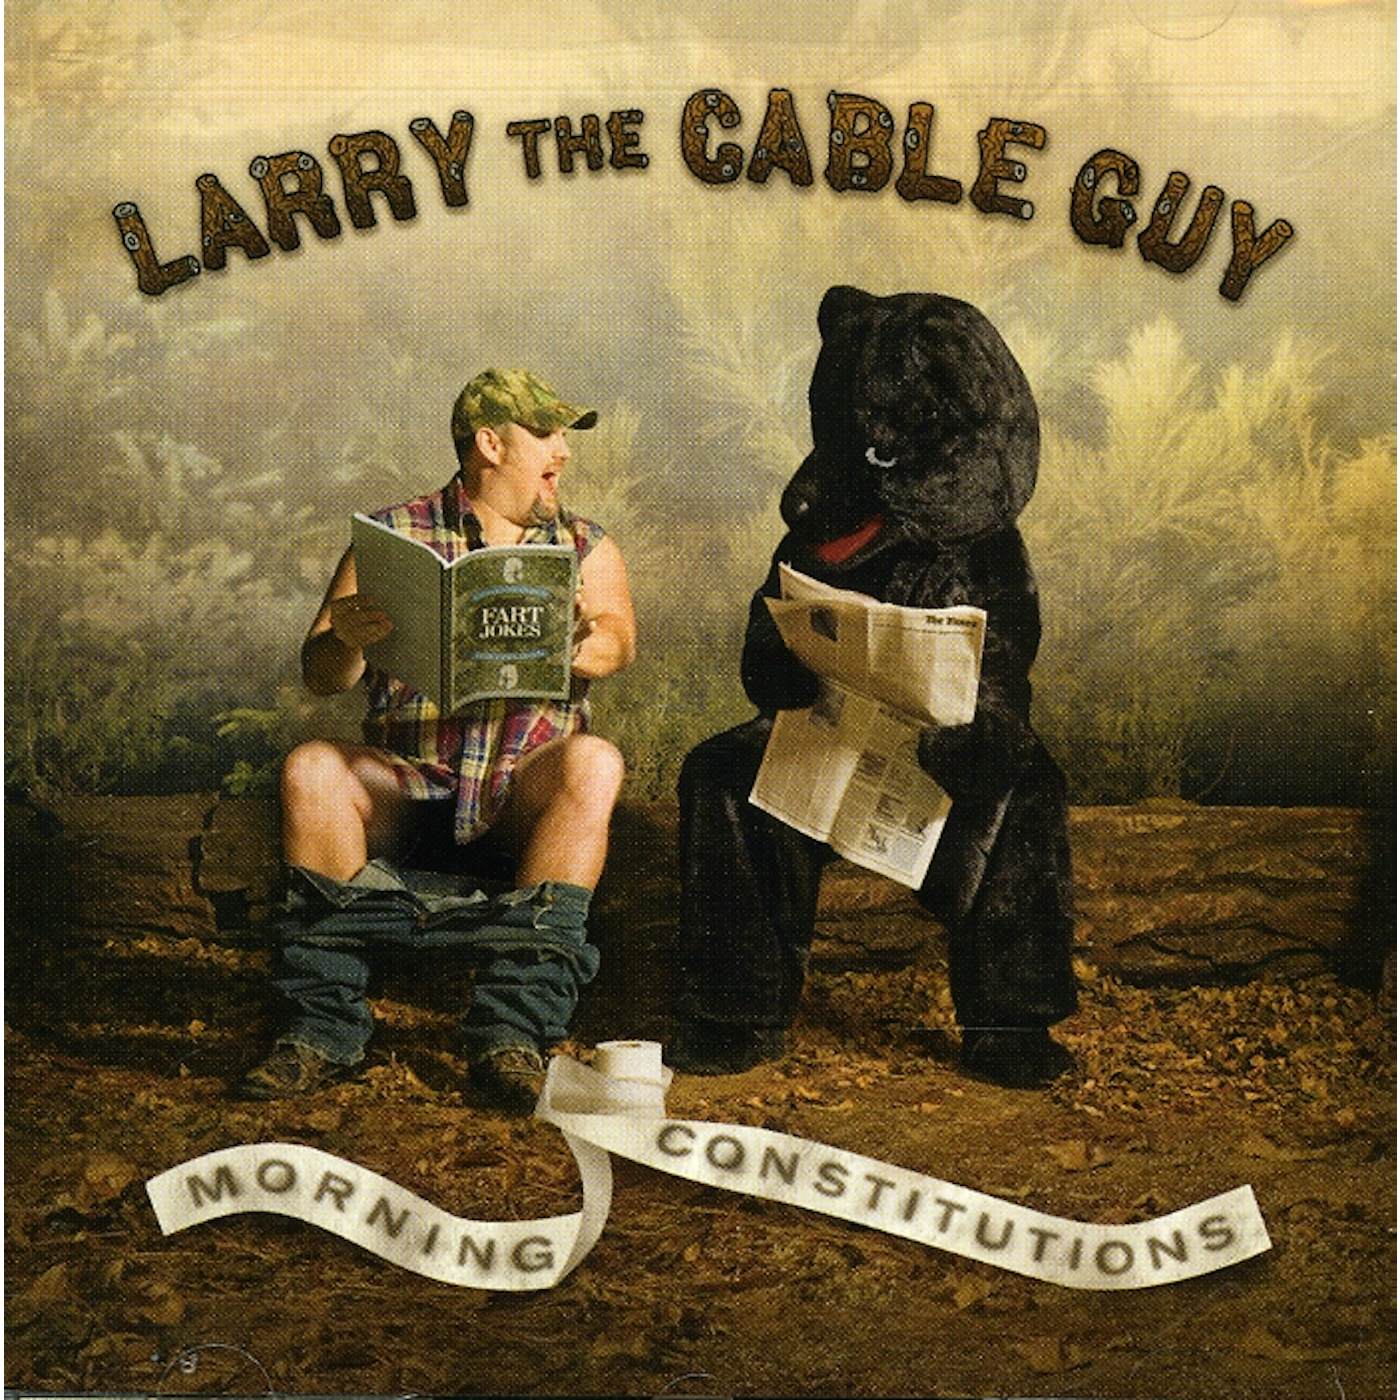 Larry The Cable Guy MORNING CONSTITUTIONS CD